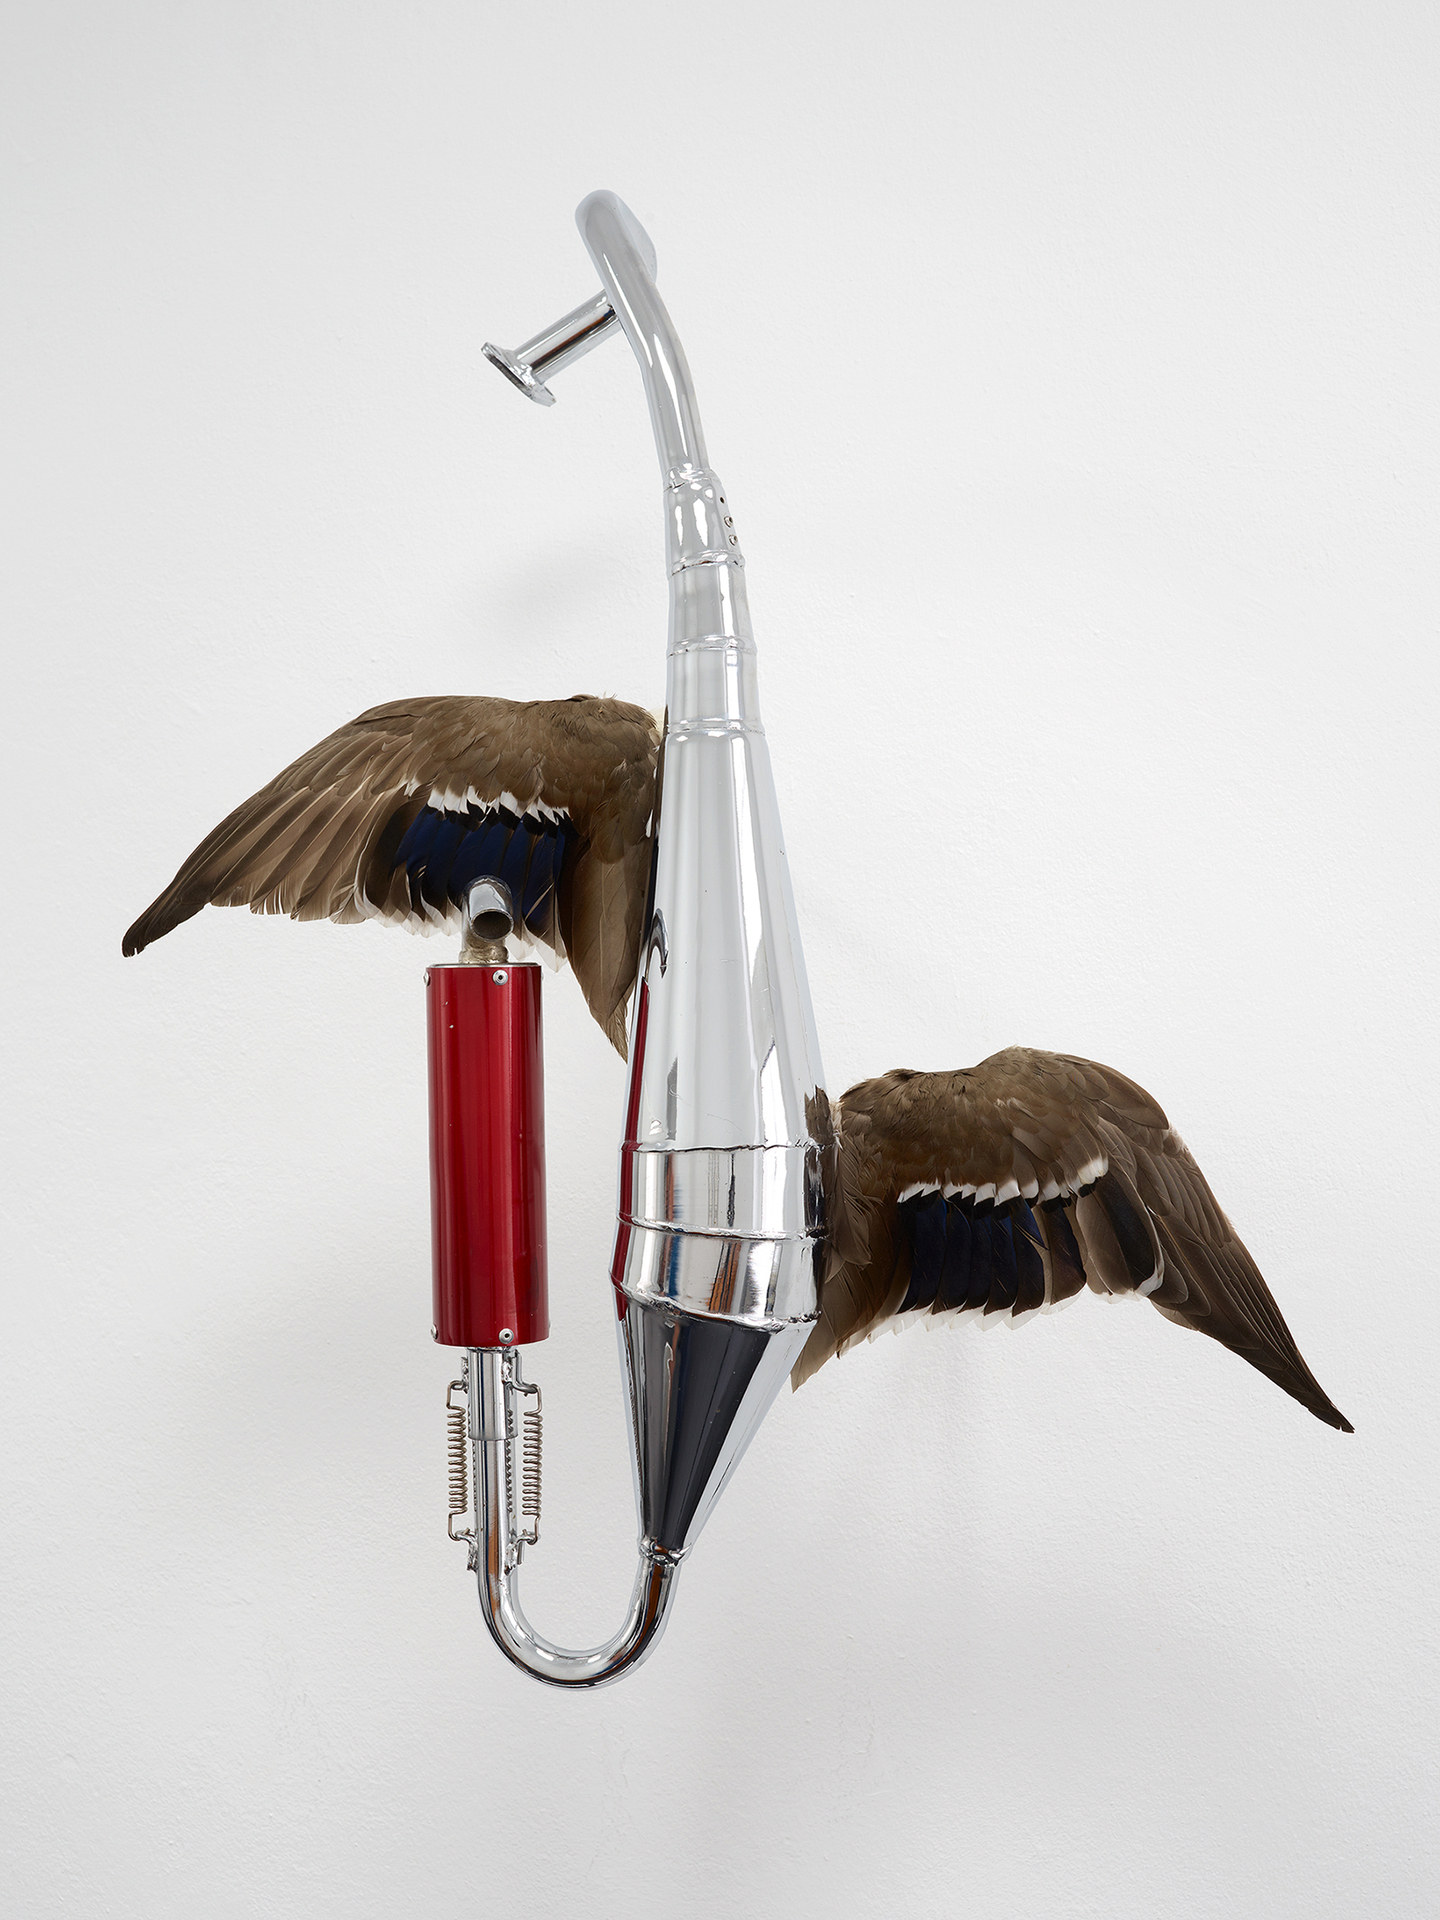 Christian Theiß, untitled, 2020, exhaust pipe, taxidermy, ca. 80 x 70 x 35 cm